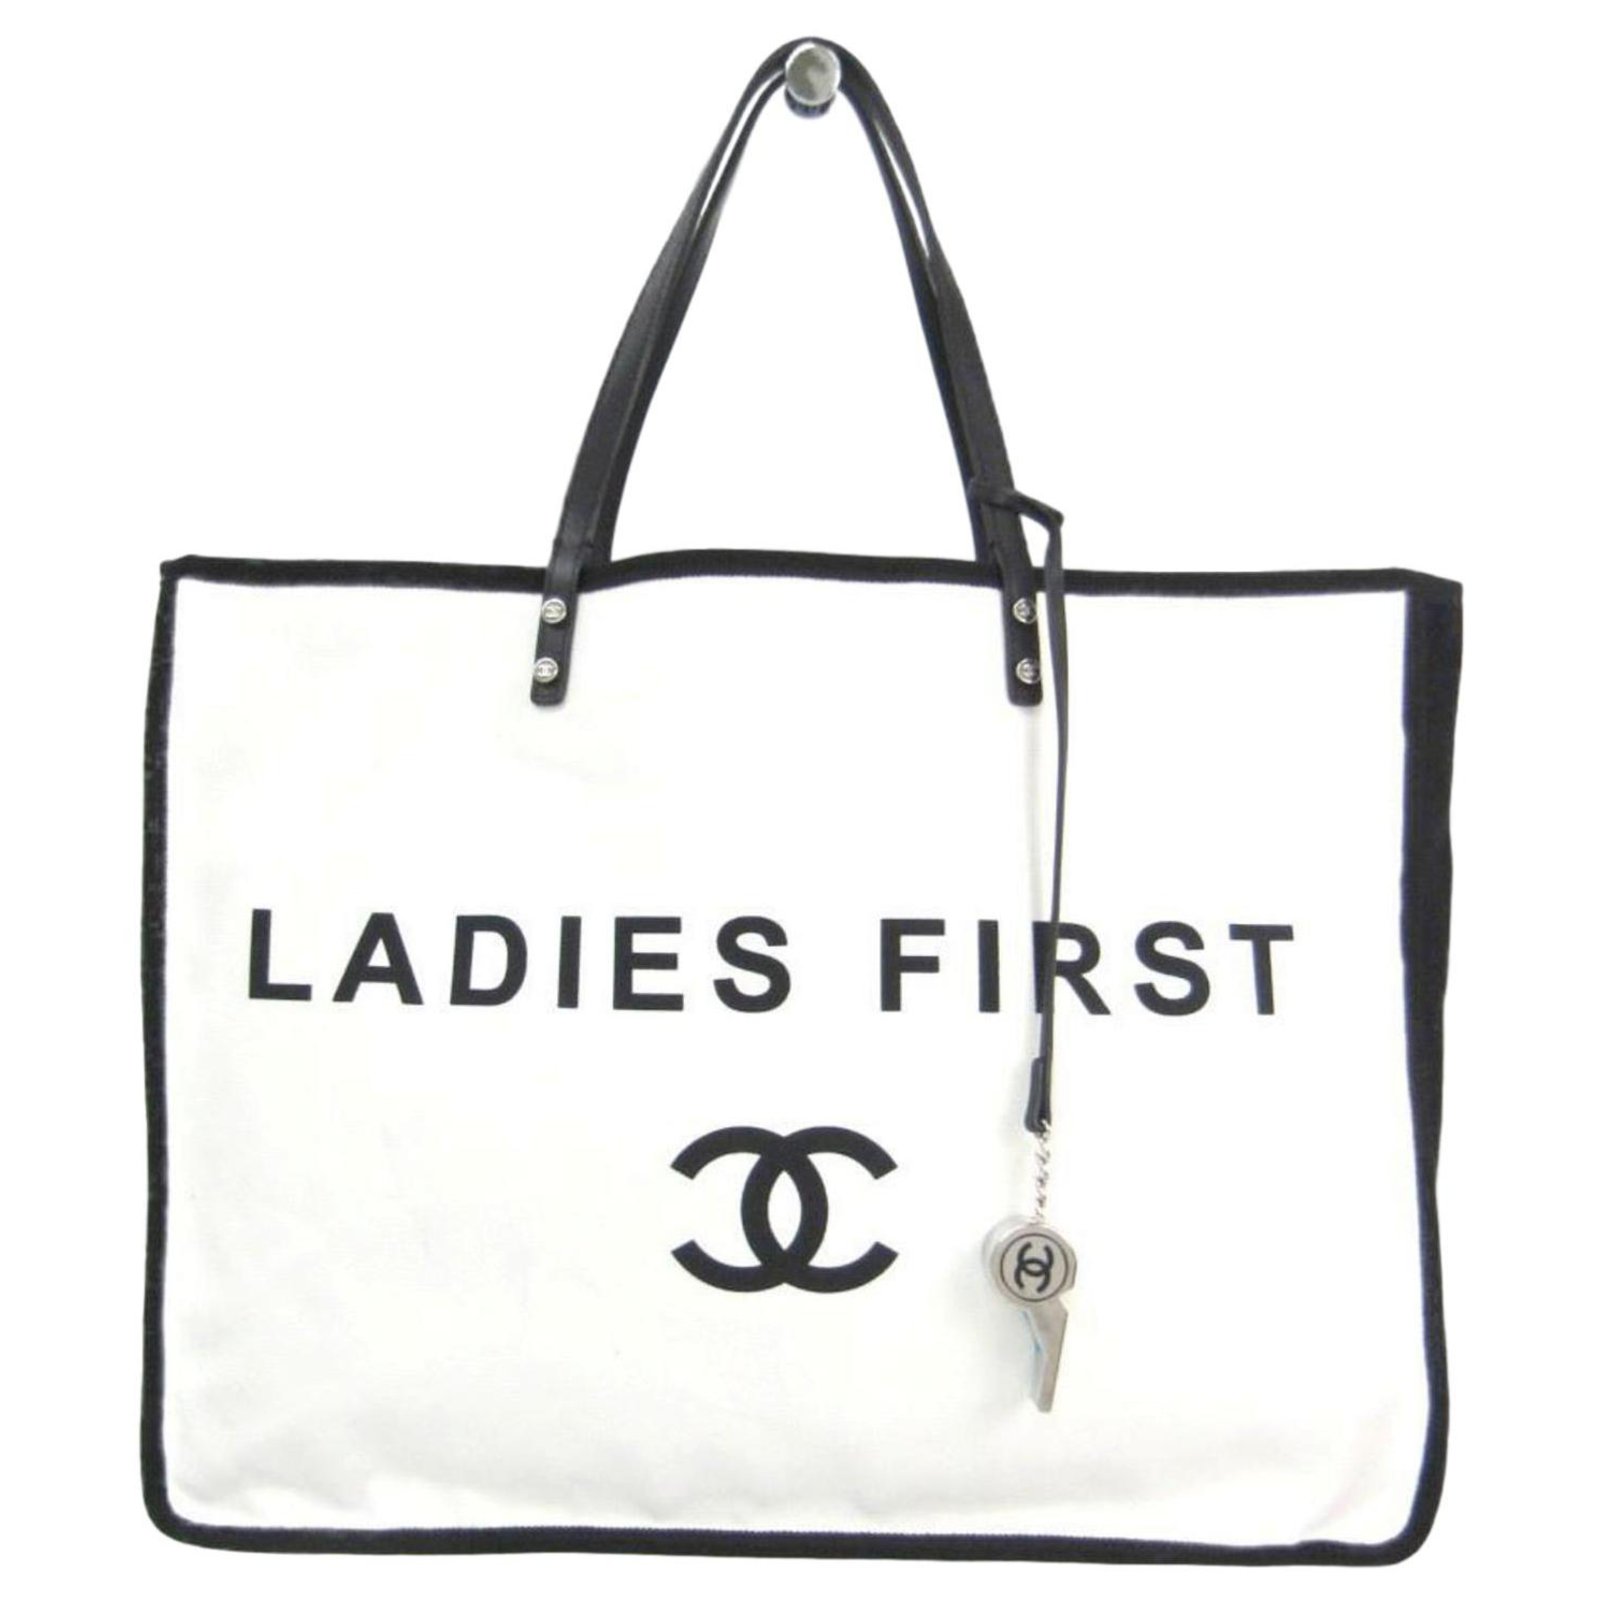 Chanel Black Ladies First Shopping Tote